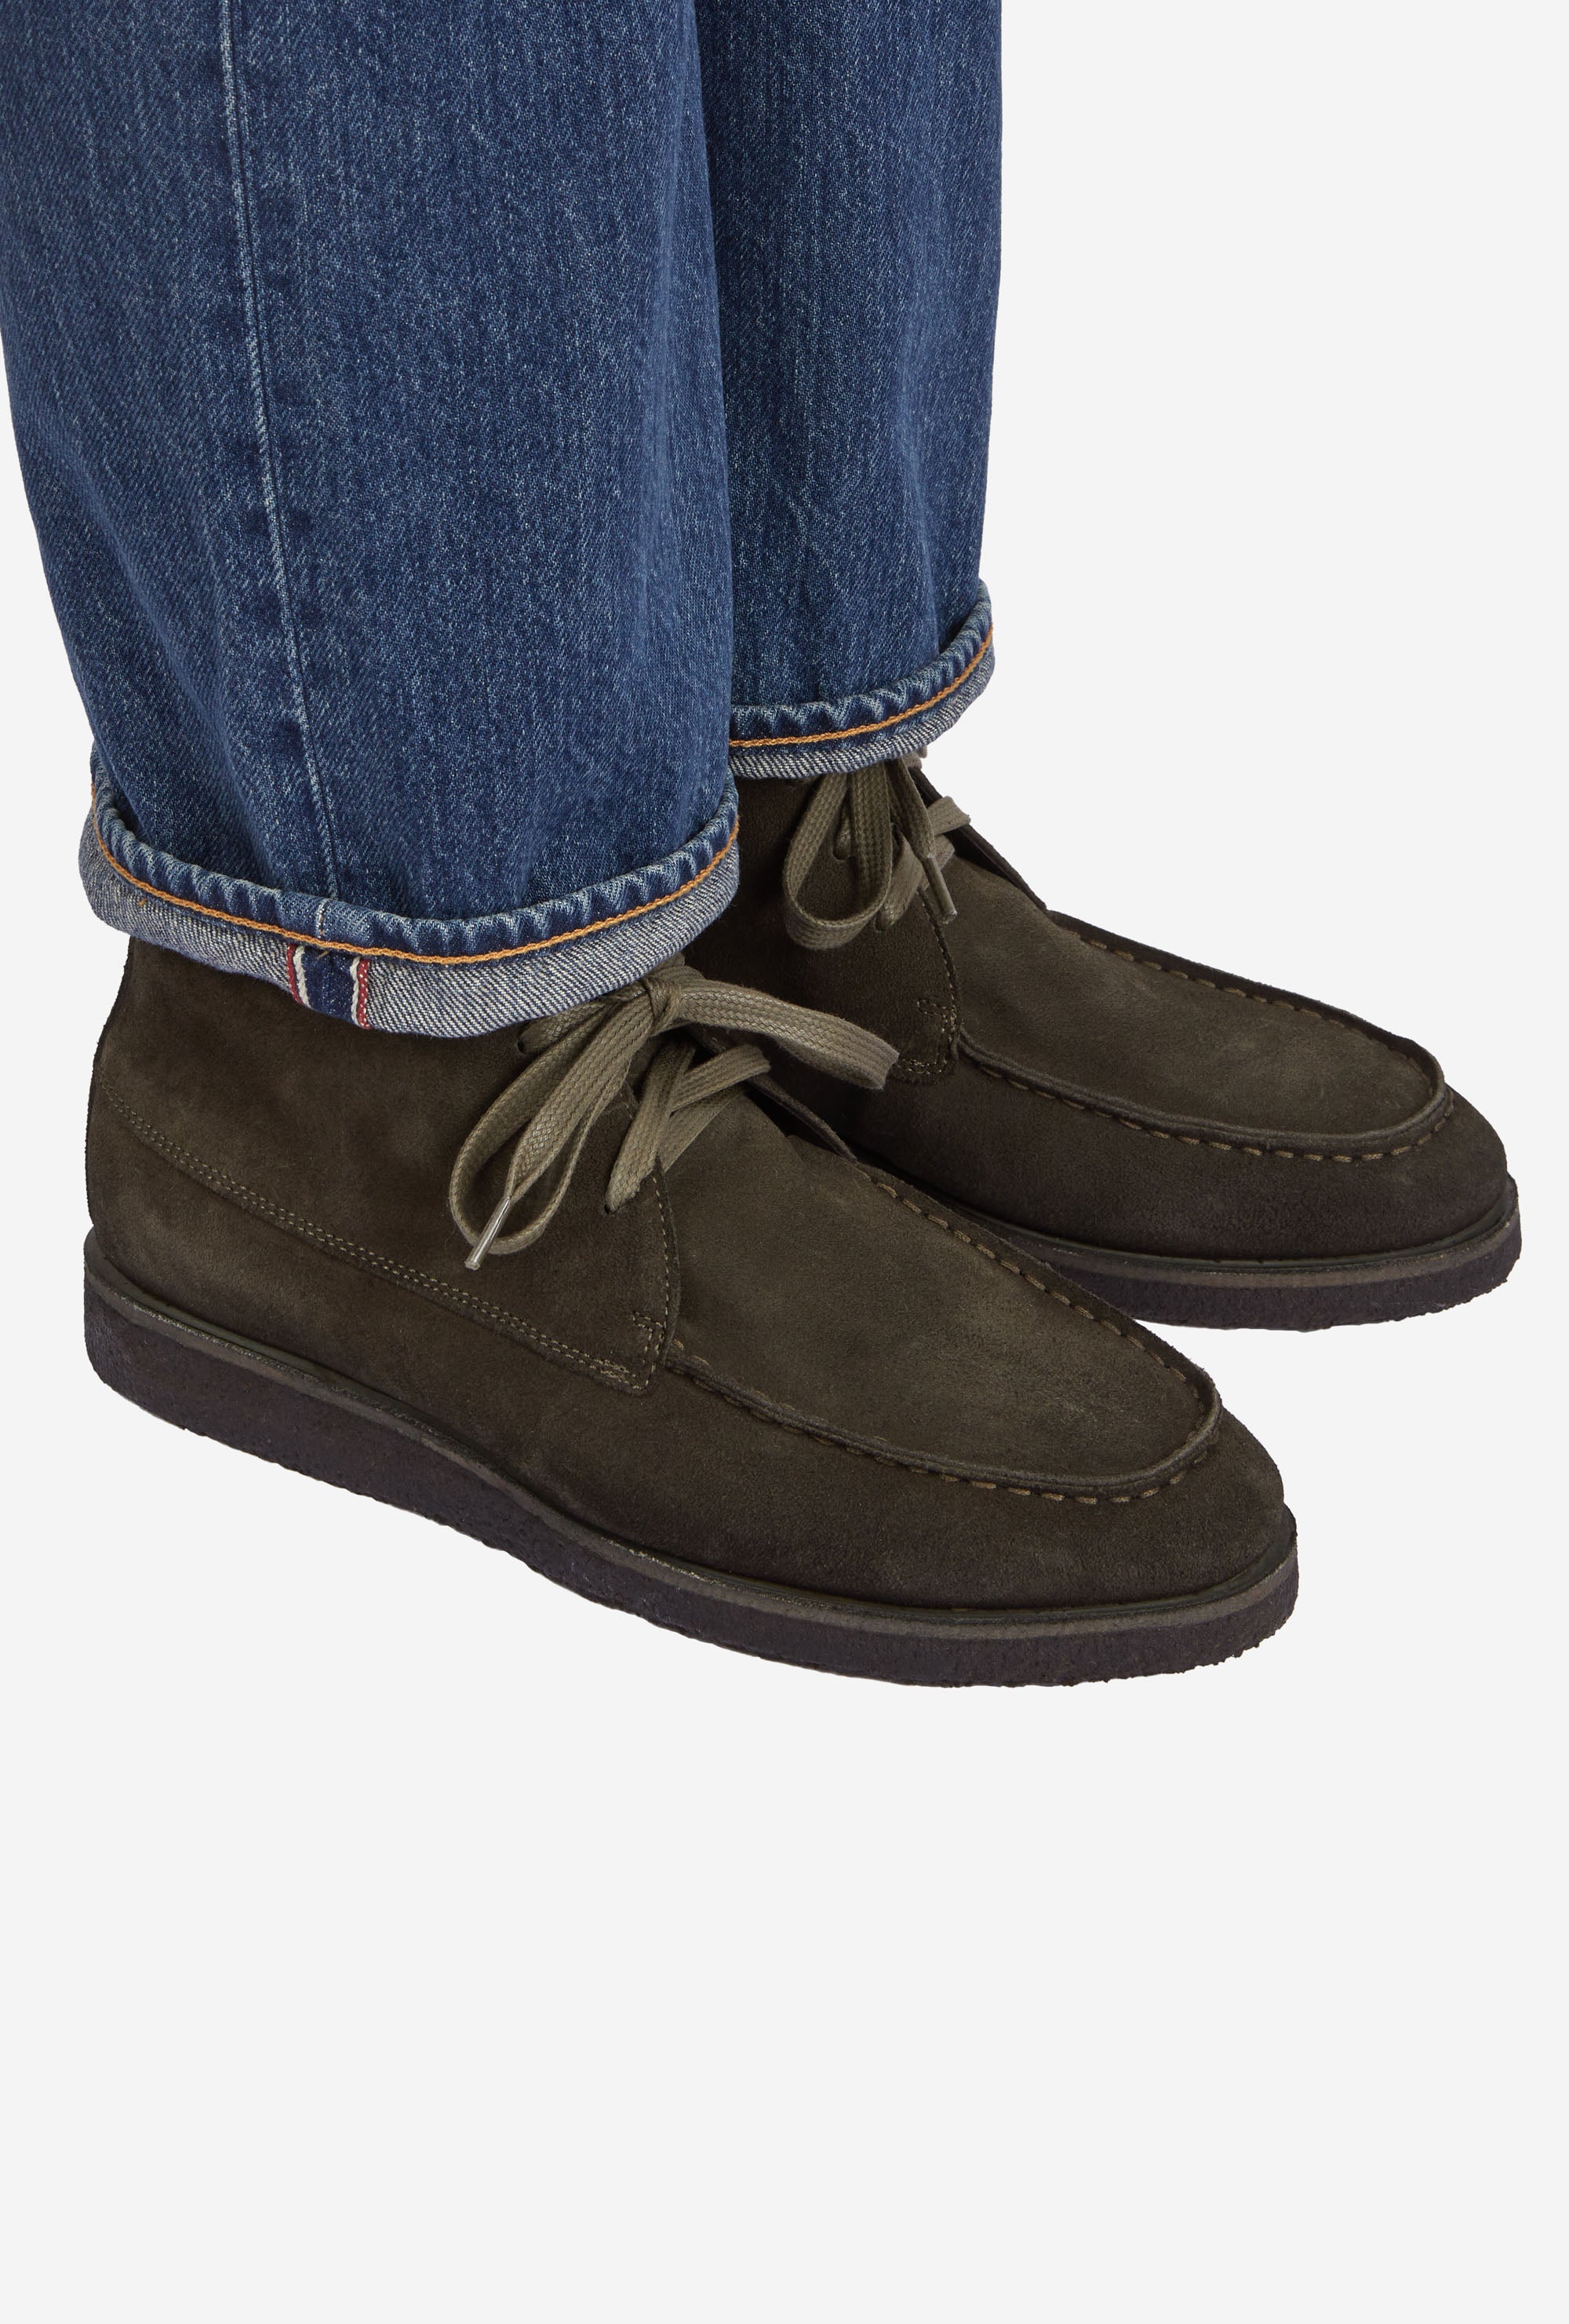 Alpine Boot Crepe Sole Forest Suede